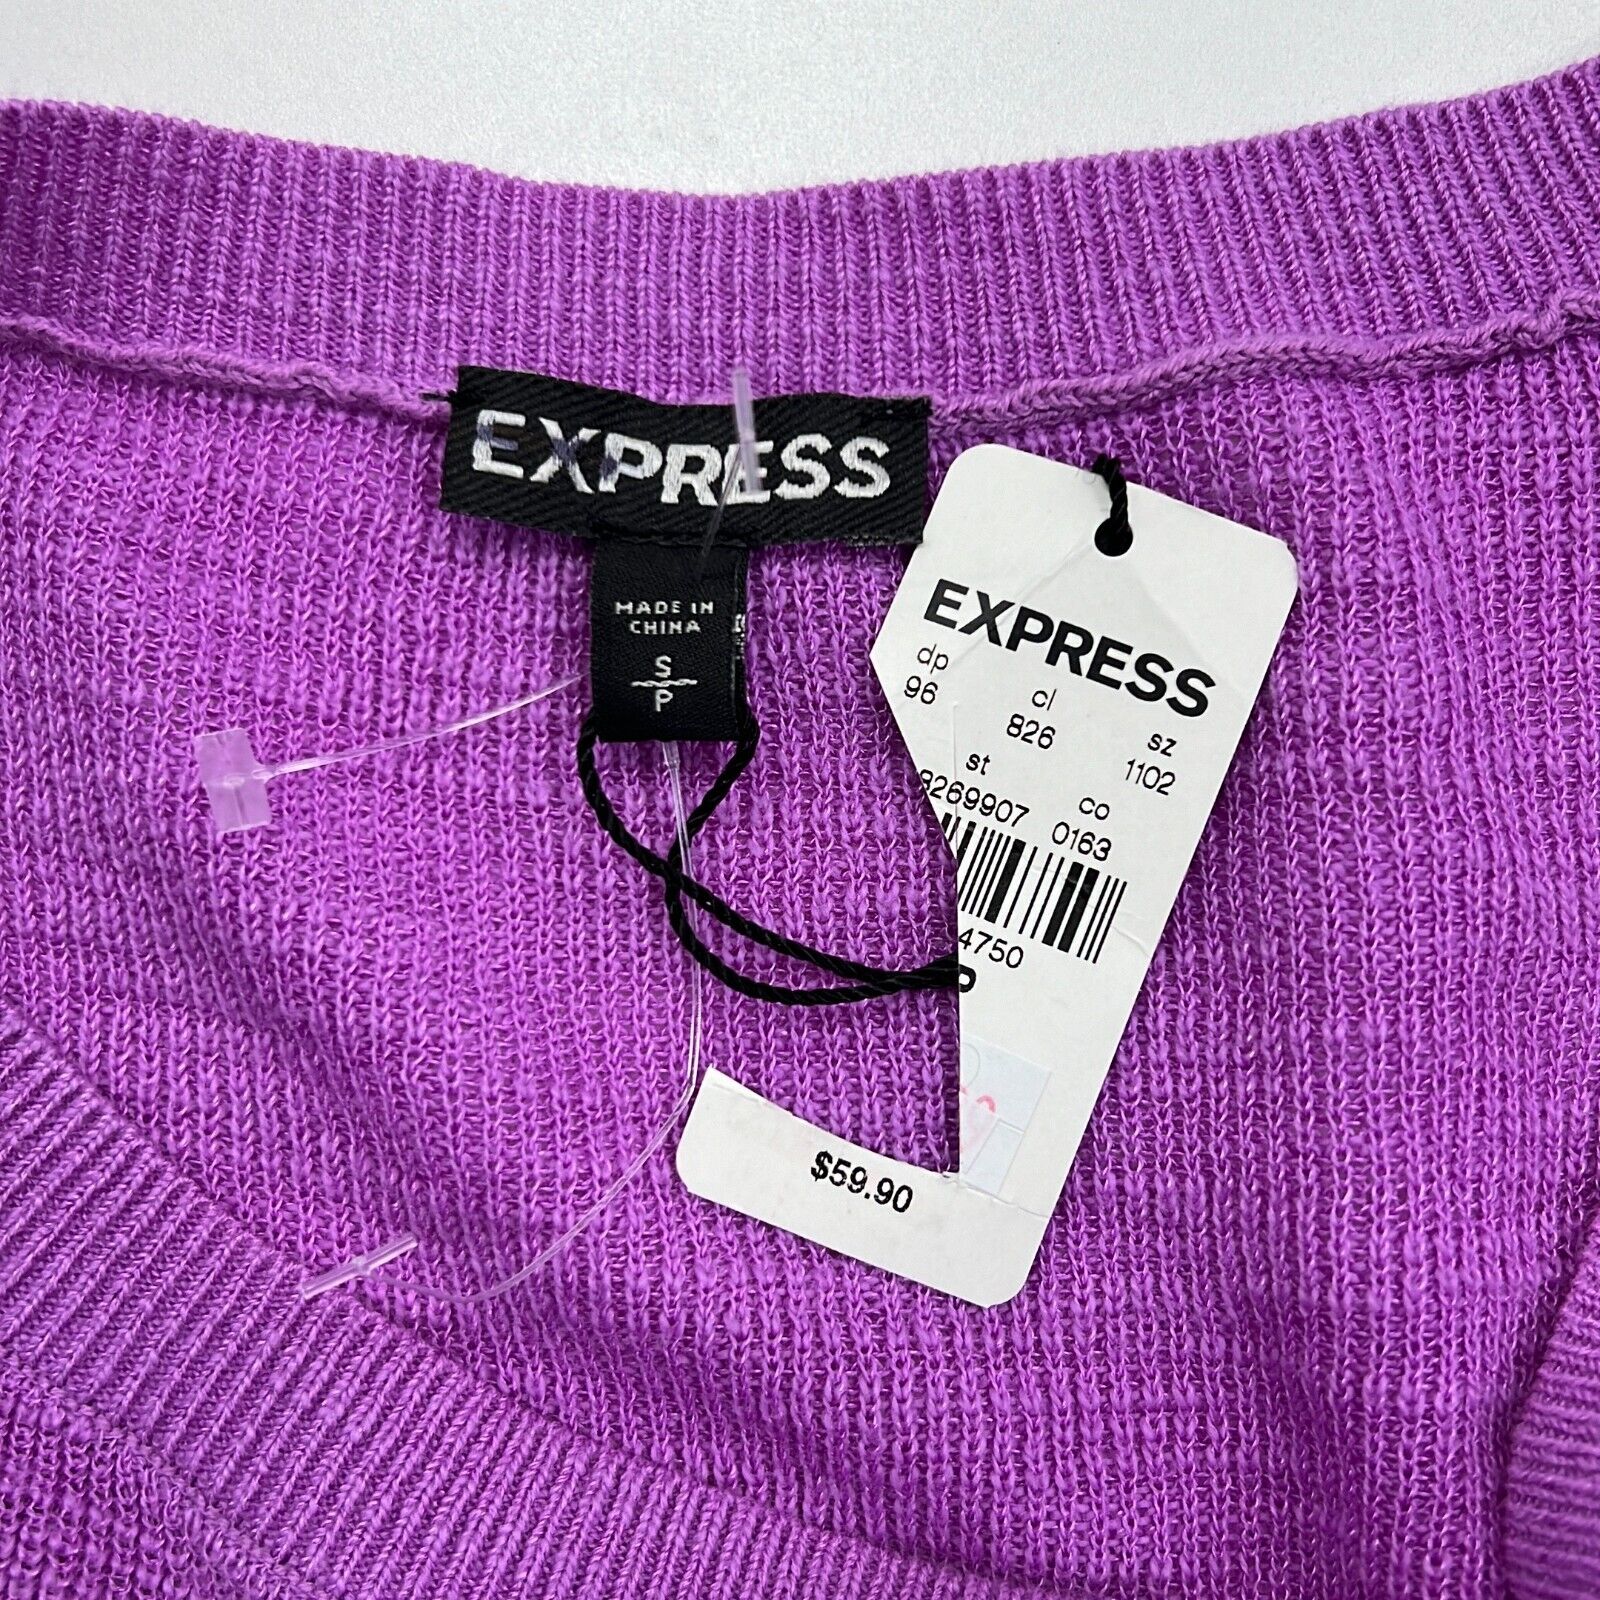 NWT Express Women's Purple Round Neck Ruffle Sleeve Blouse Top Size Small